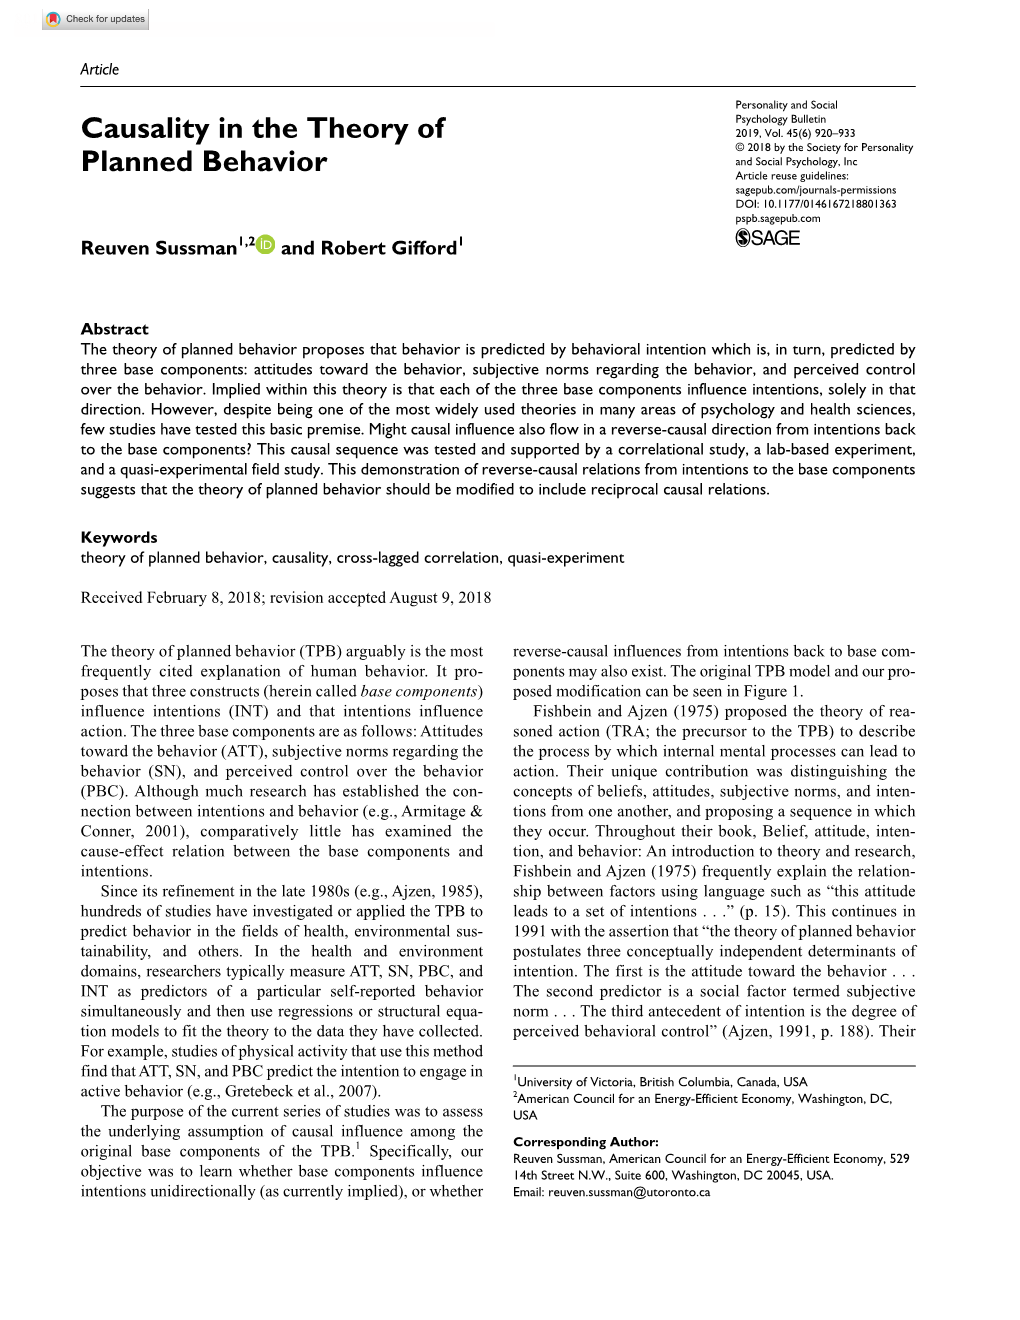 Causality in the Theory of Planned Behavior